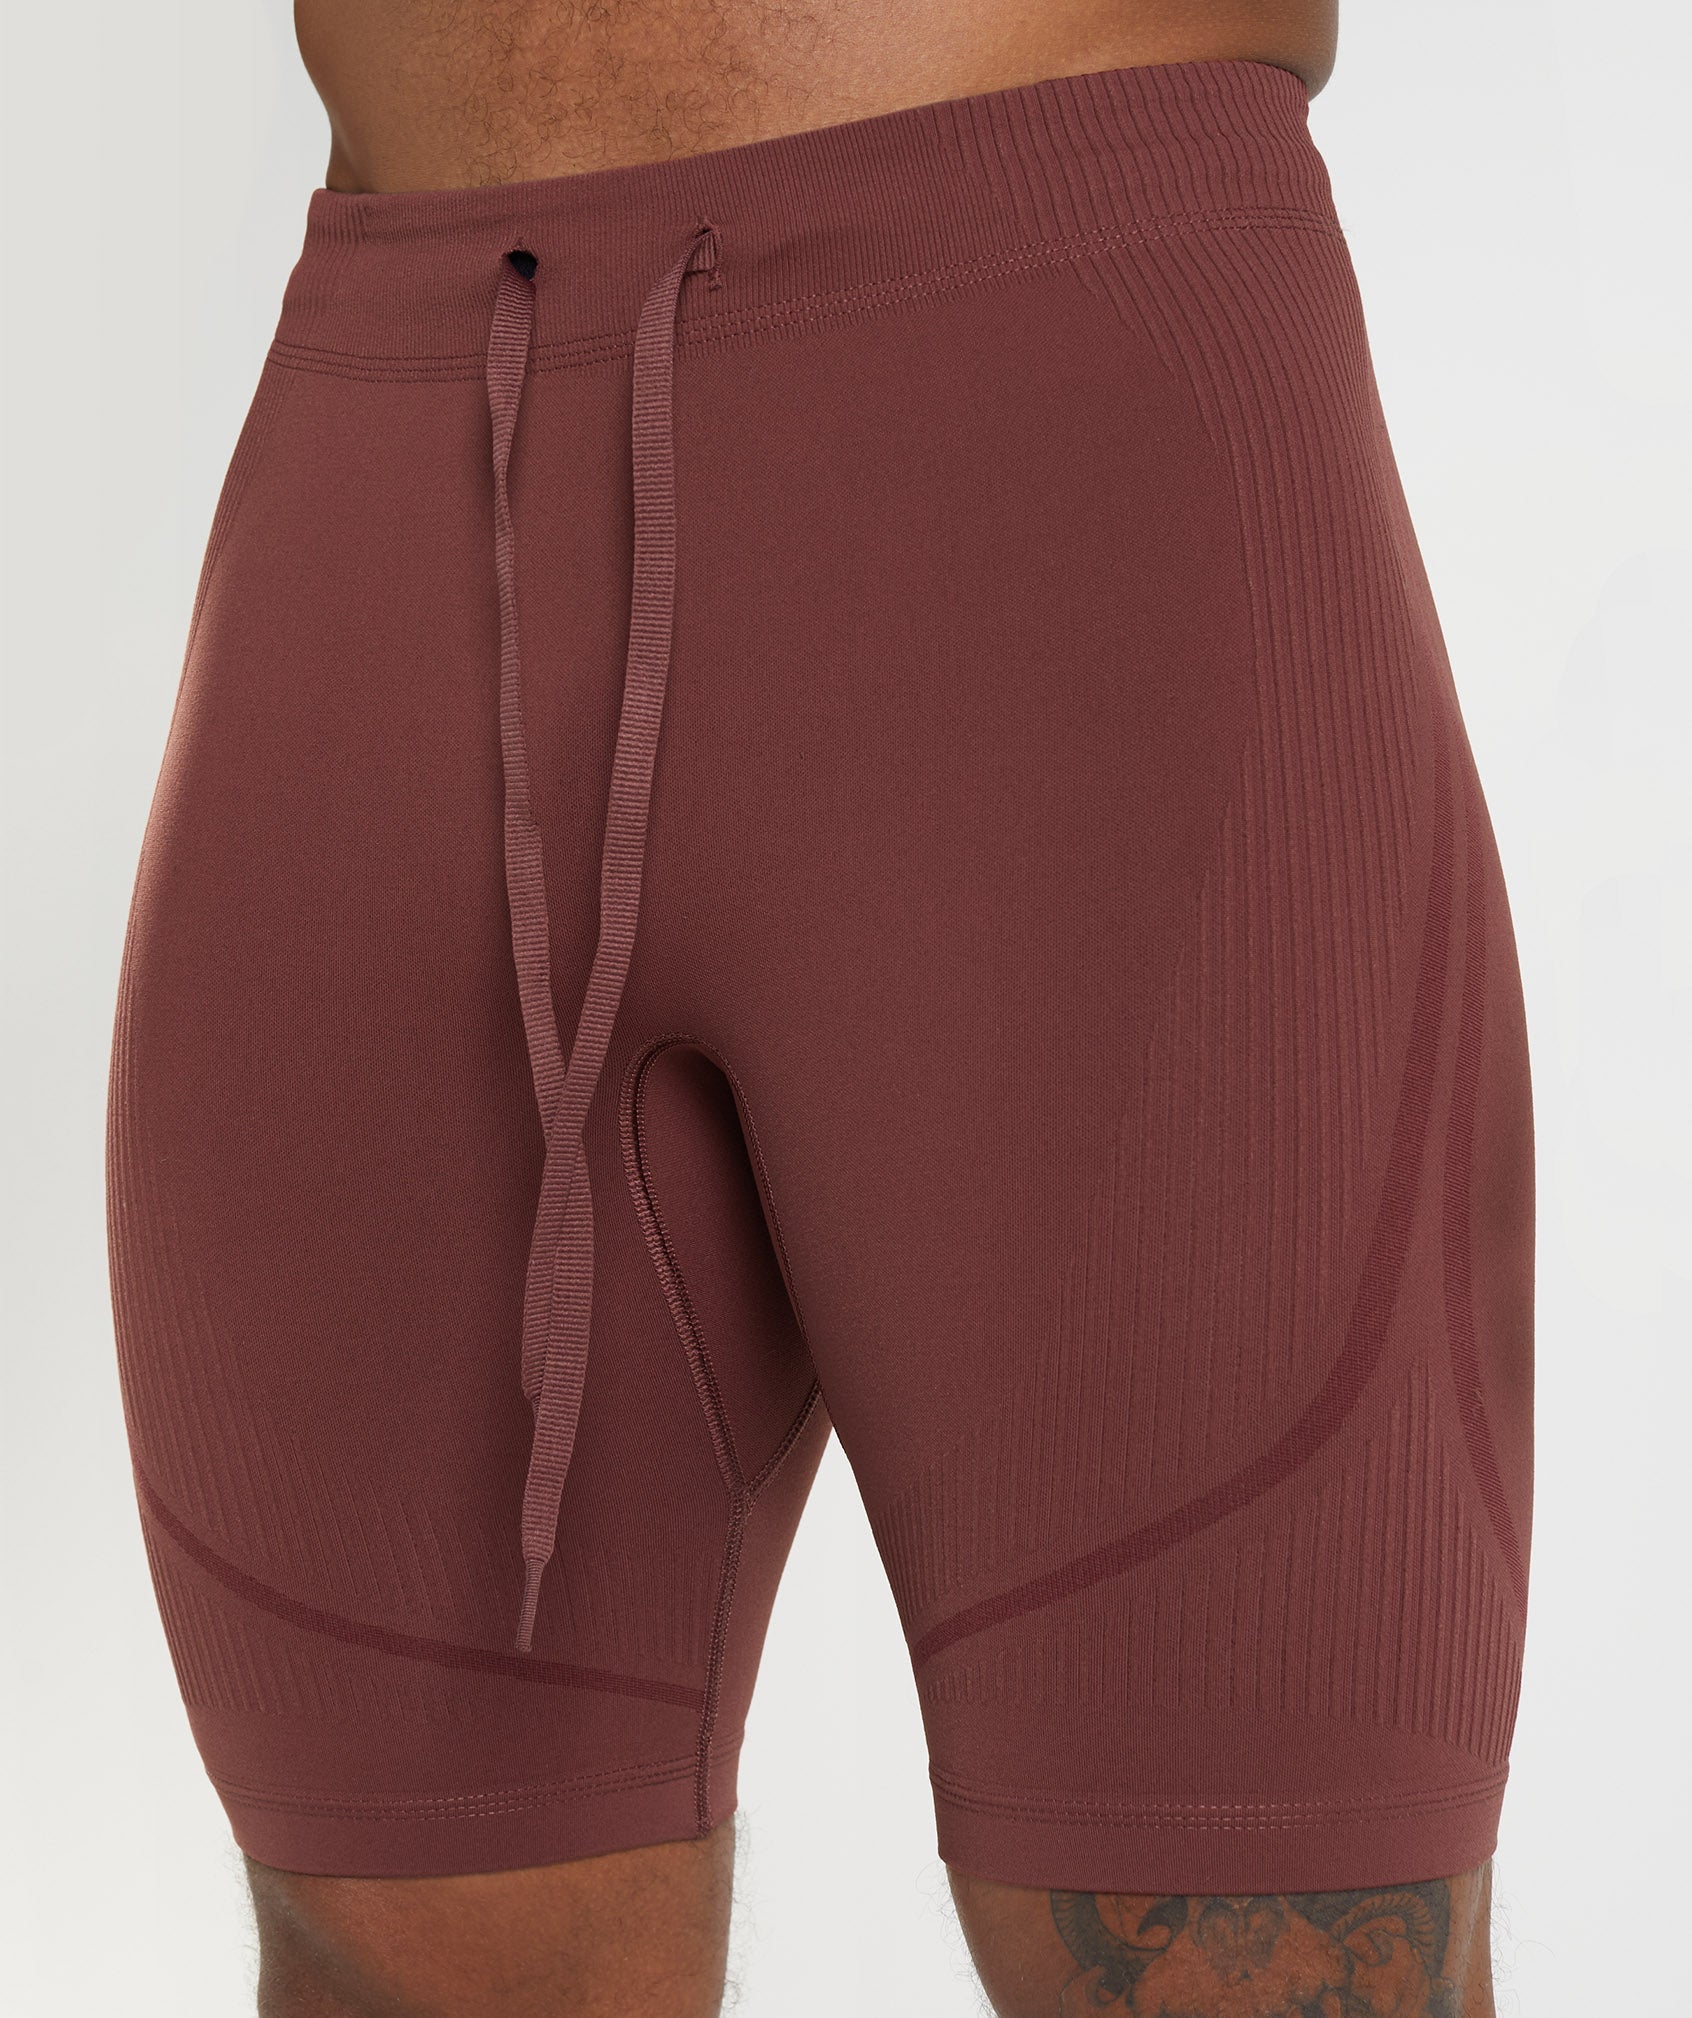 315 Seamless 1/2 Shorts in Cherry Brown/Athletic Maroon